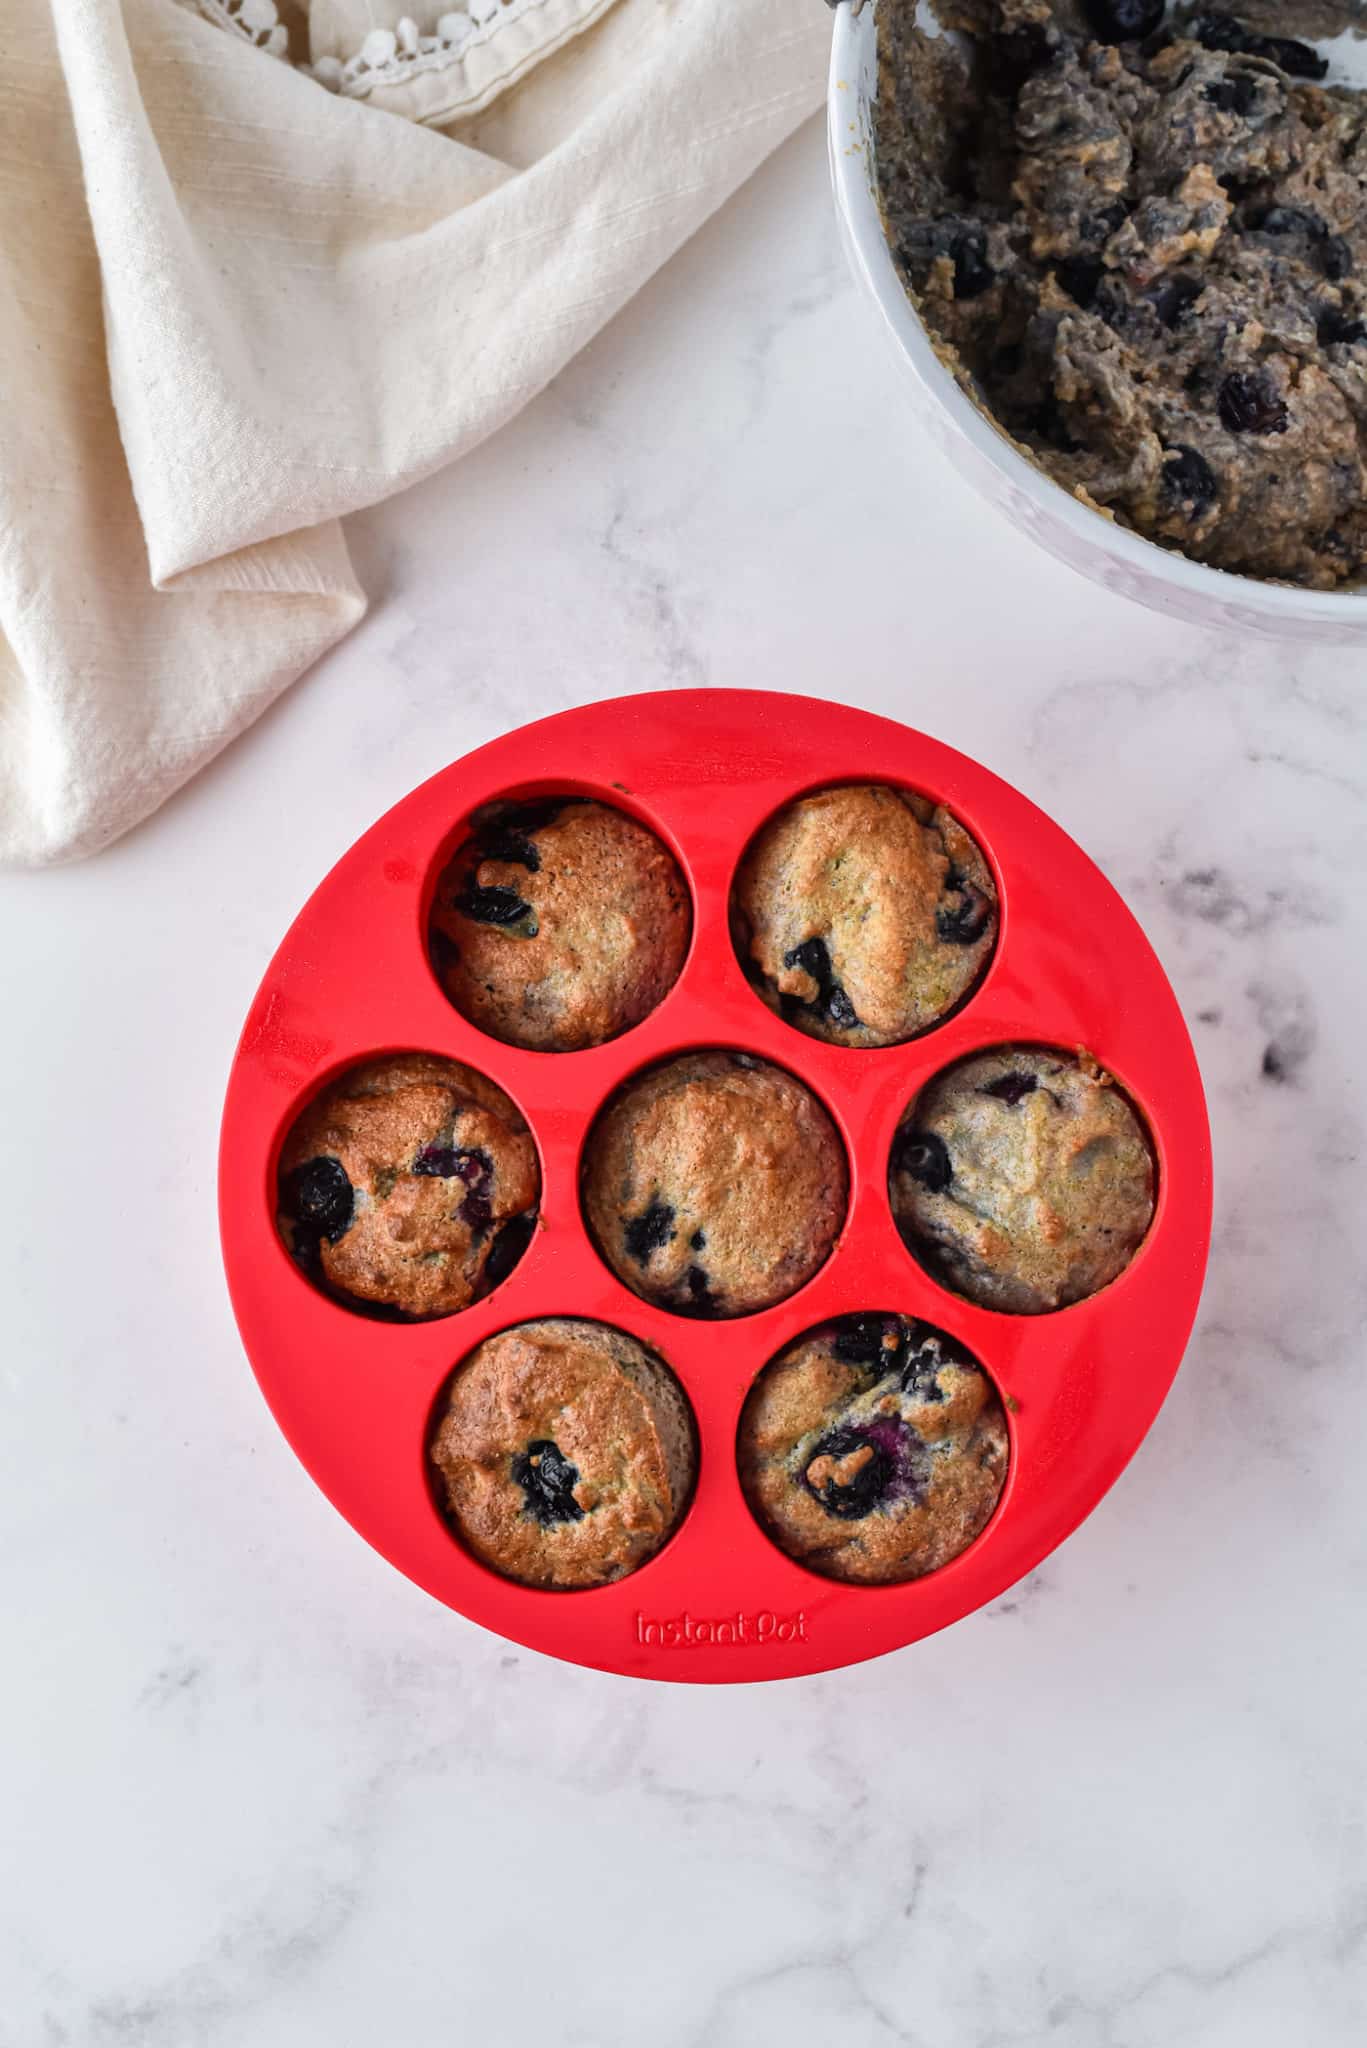 A red silicone muffin mold with 6 baked blueberry muffins.